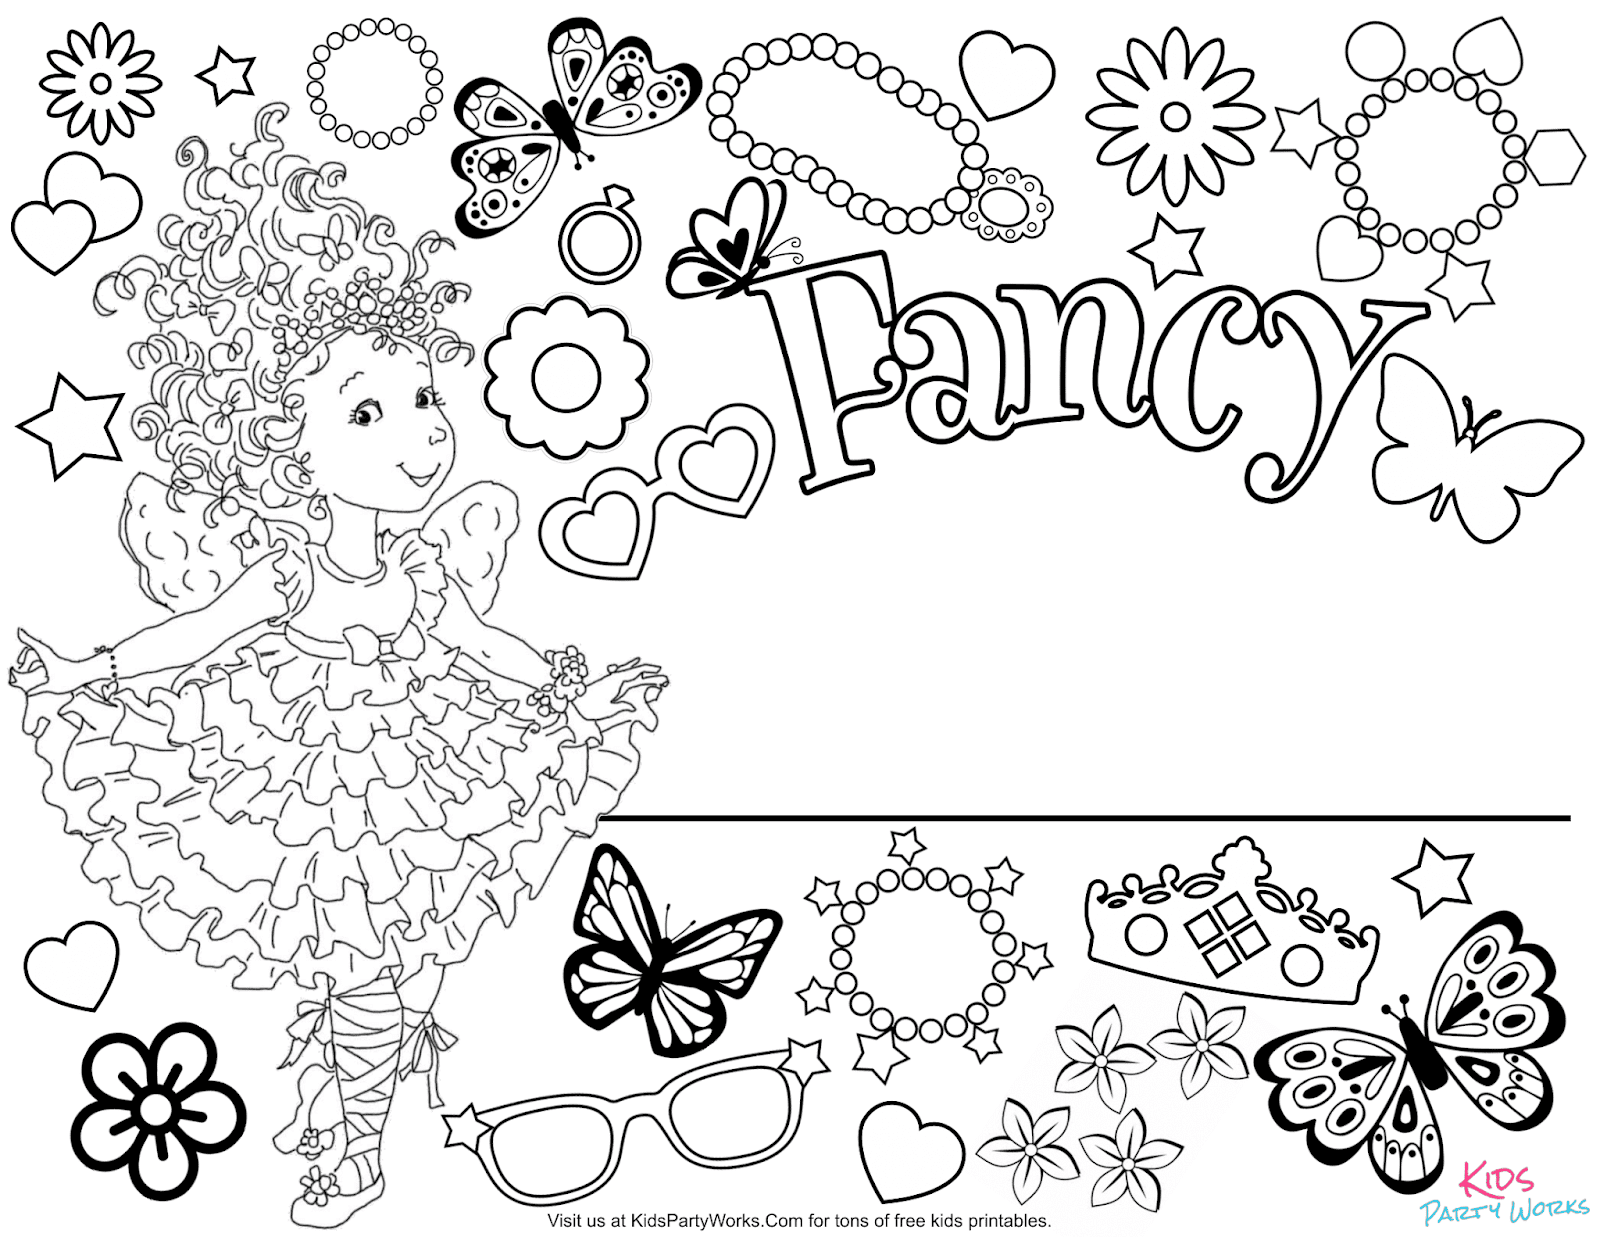 fancy-nancy-volume-1-coming-to-dvd-november-20th-free-printables-nanny-to-mommy